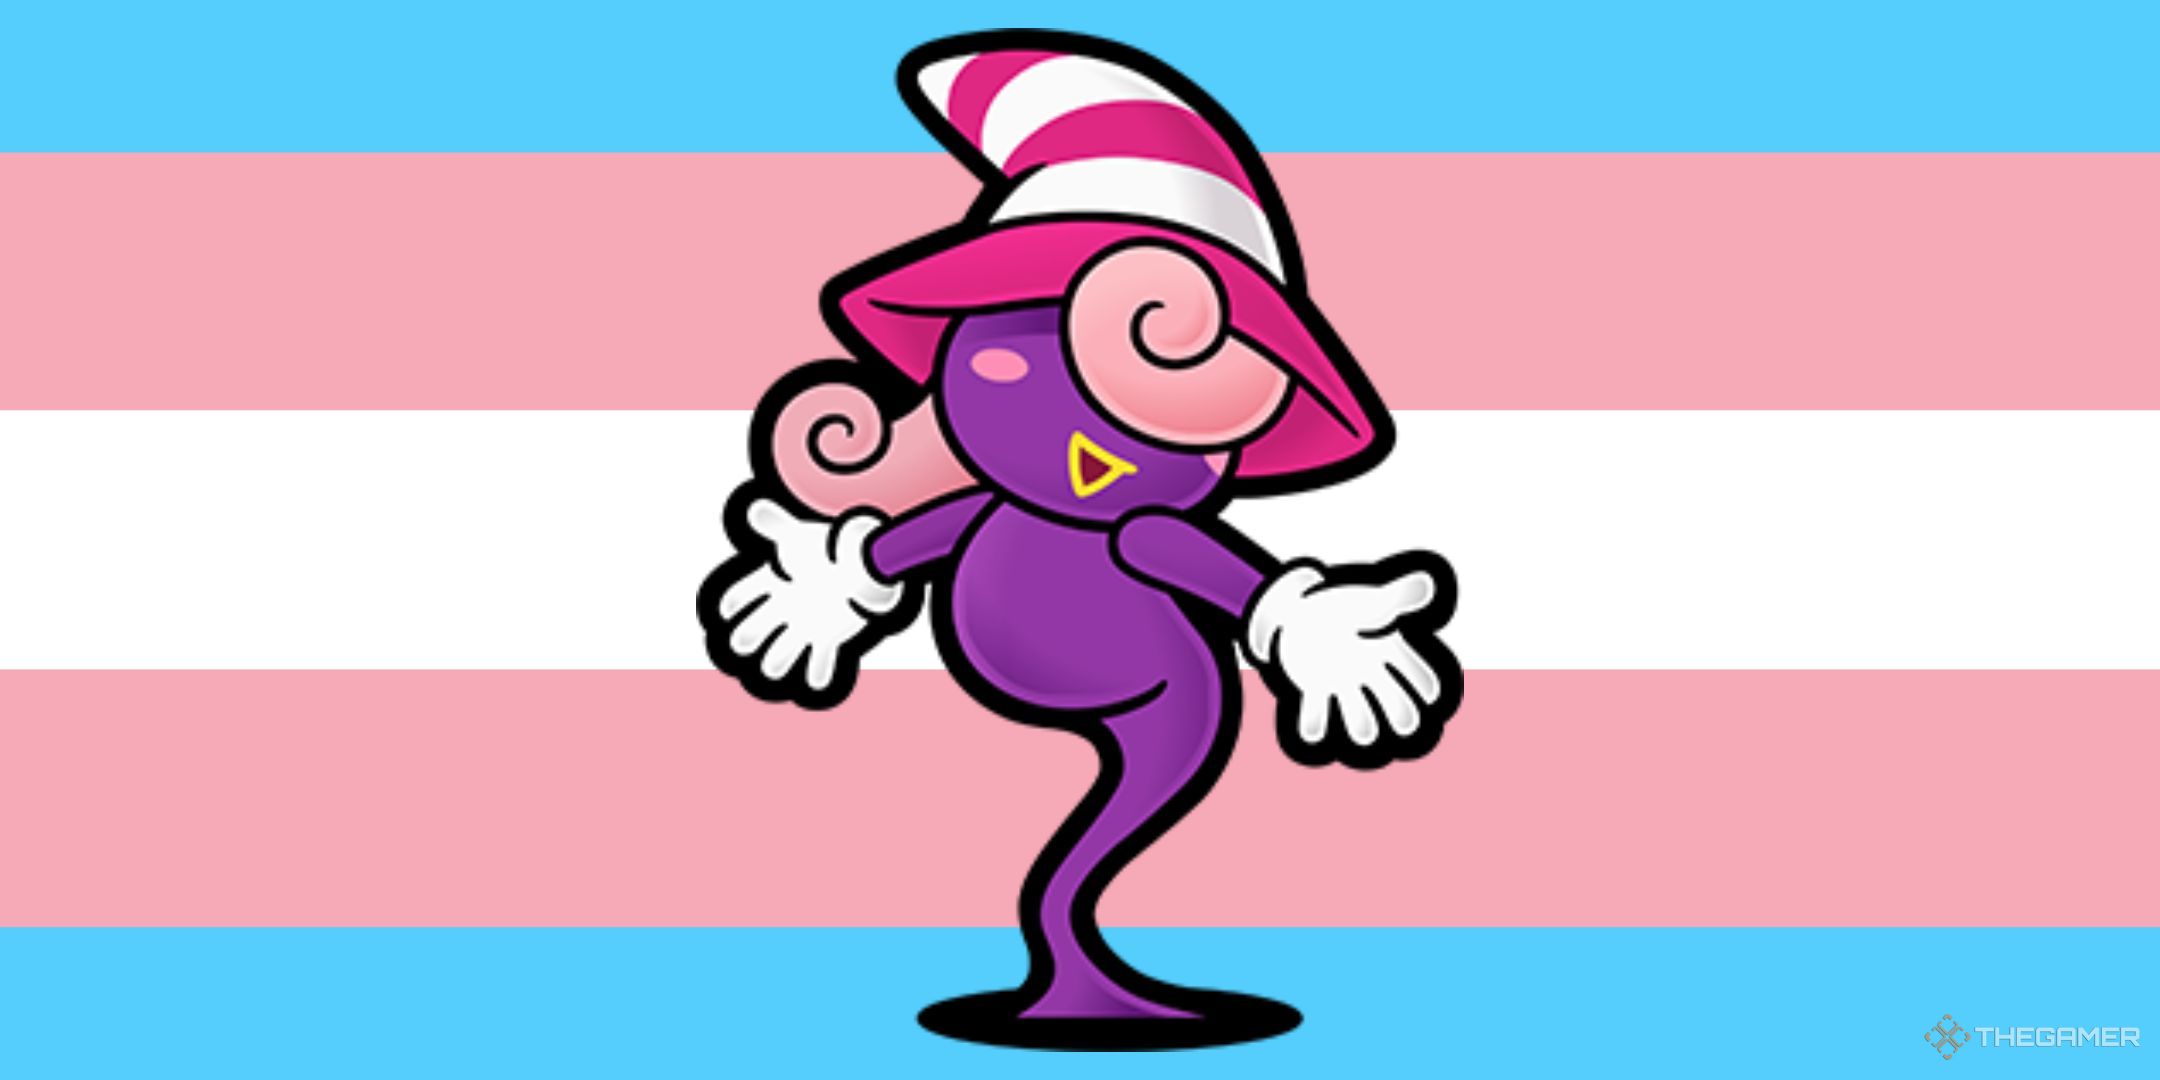 Vivian from Paper Mario: The Thousand-Year Door in front of the Trans flag.